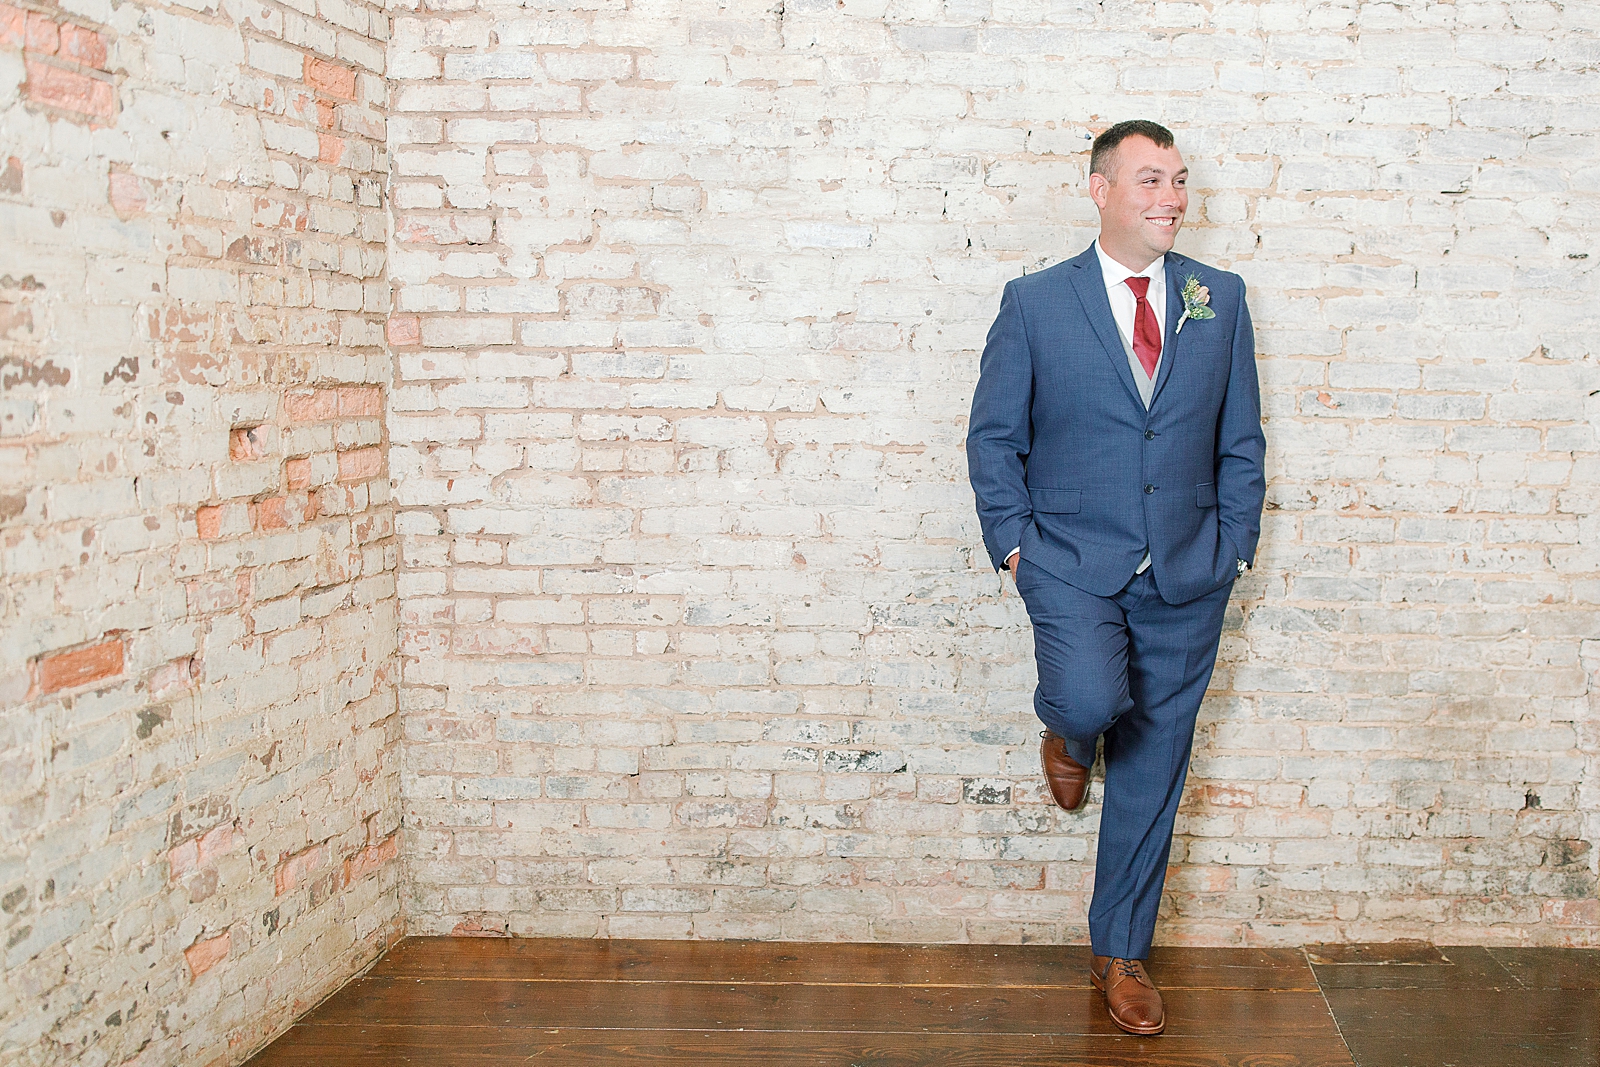 The Hackney Warehouse Groom Leaning on Wall Smiling Photo